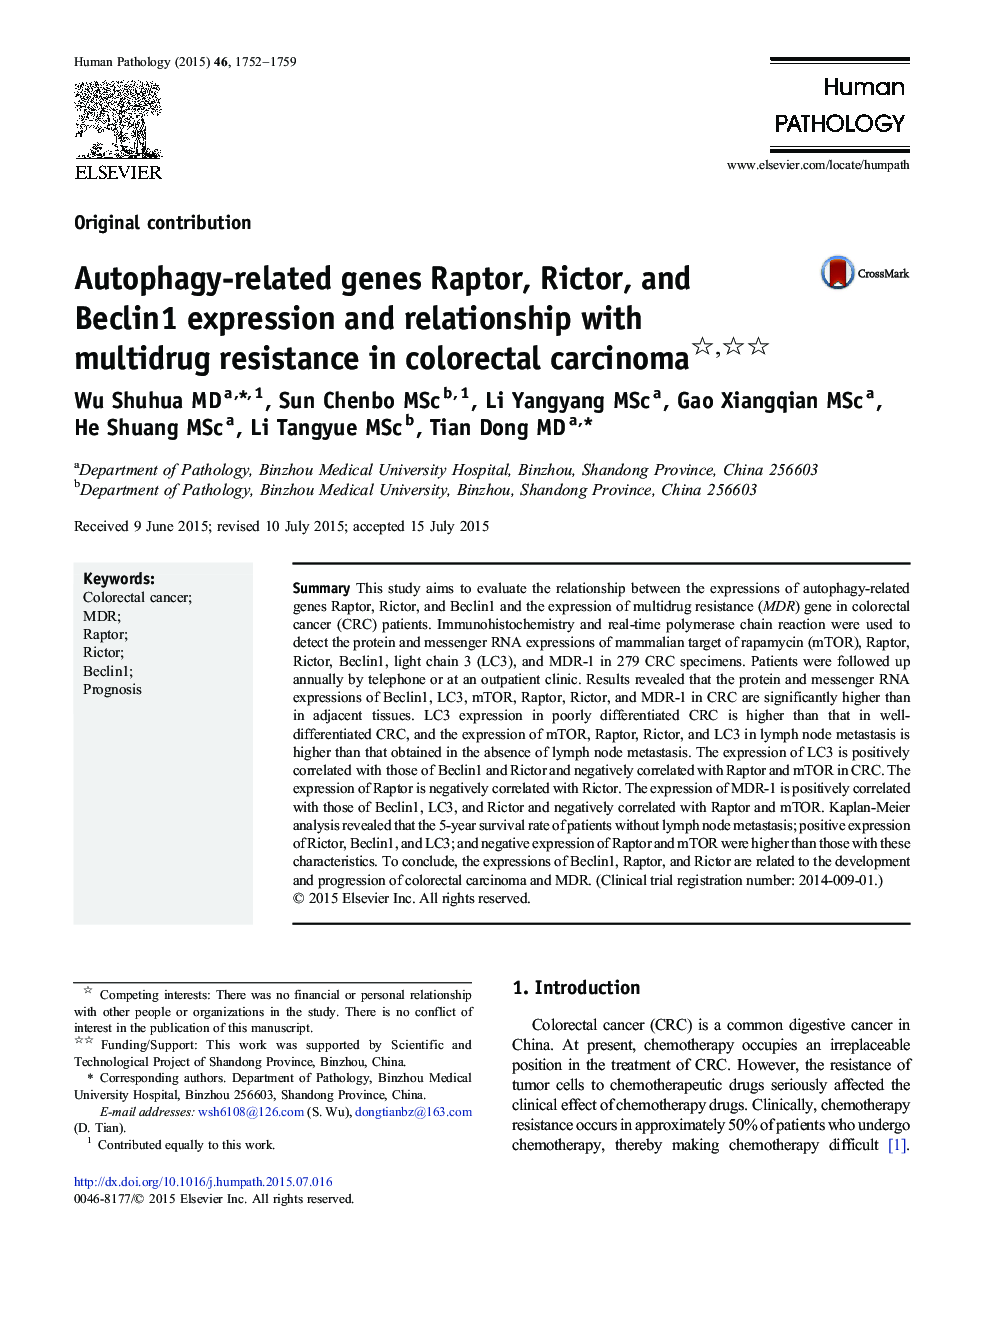 Autophagy-related genes Raptor, Rictor, and Beclin1 expression and relationship with multidrug resistance in colorectal carcinoma 